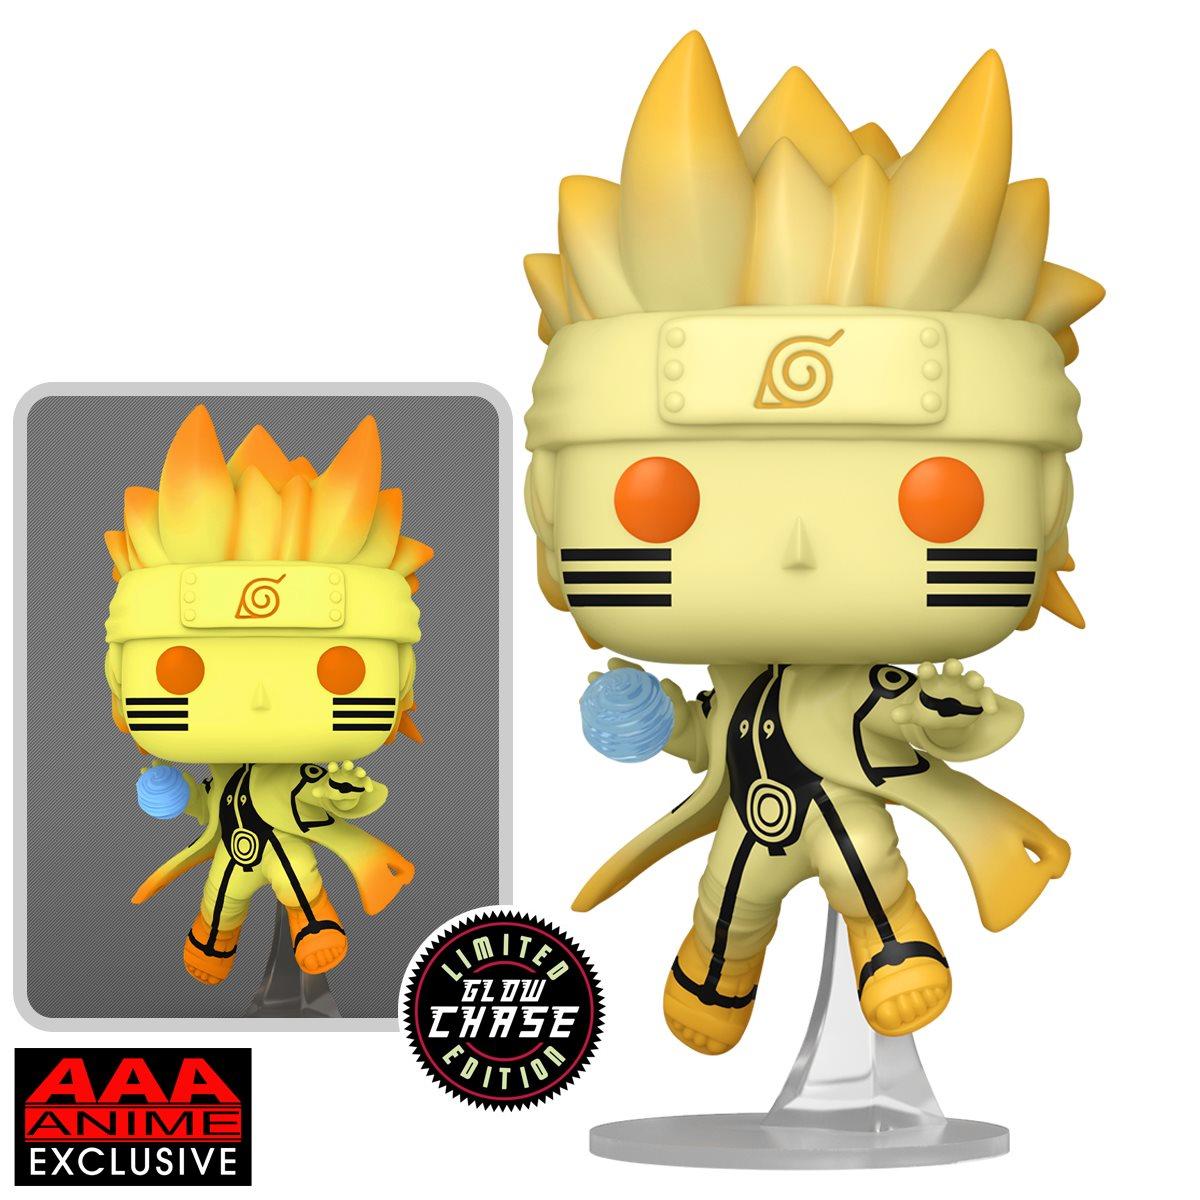 Moralsk uddannelse Næsten død lommeregner Naruto Kurama Link Mode Funko Pop With Chase AAA Anime Exclusive Is On Sale  Now